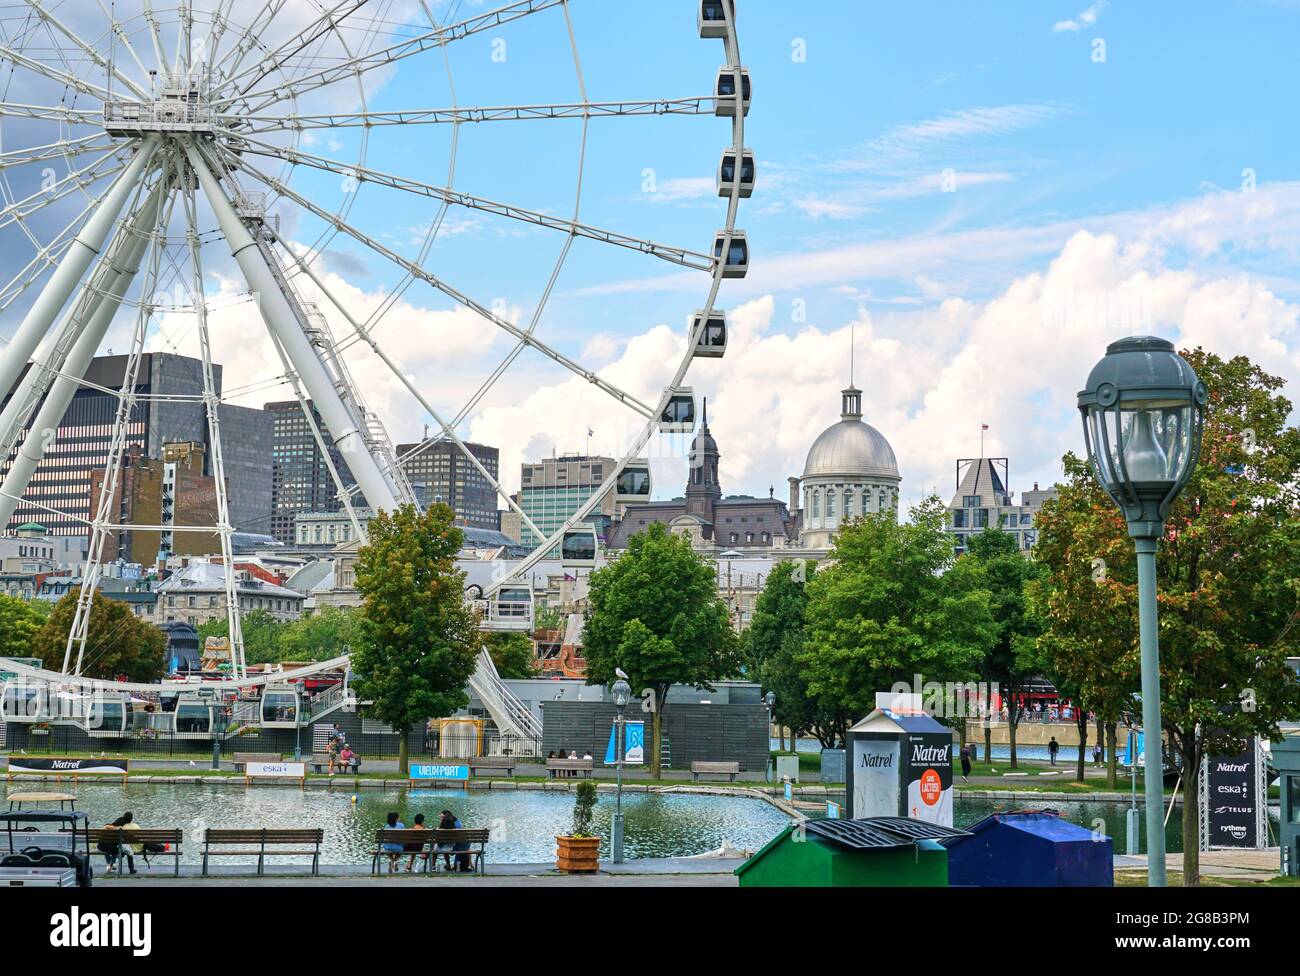 Canada, Montreal - July 11, 2021: Scenic view of Old Port of Montreal. Ferris wheel La Grande Roue, Bonsecours Market, City Hall buildings over blue s Stock Photo